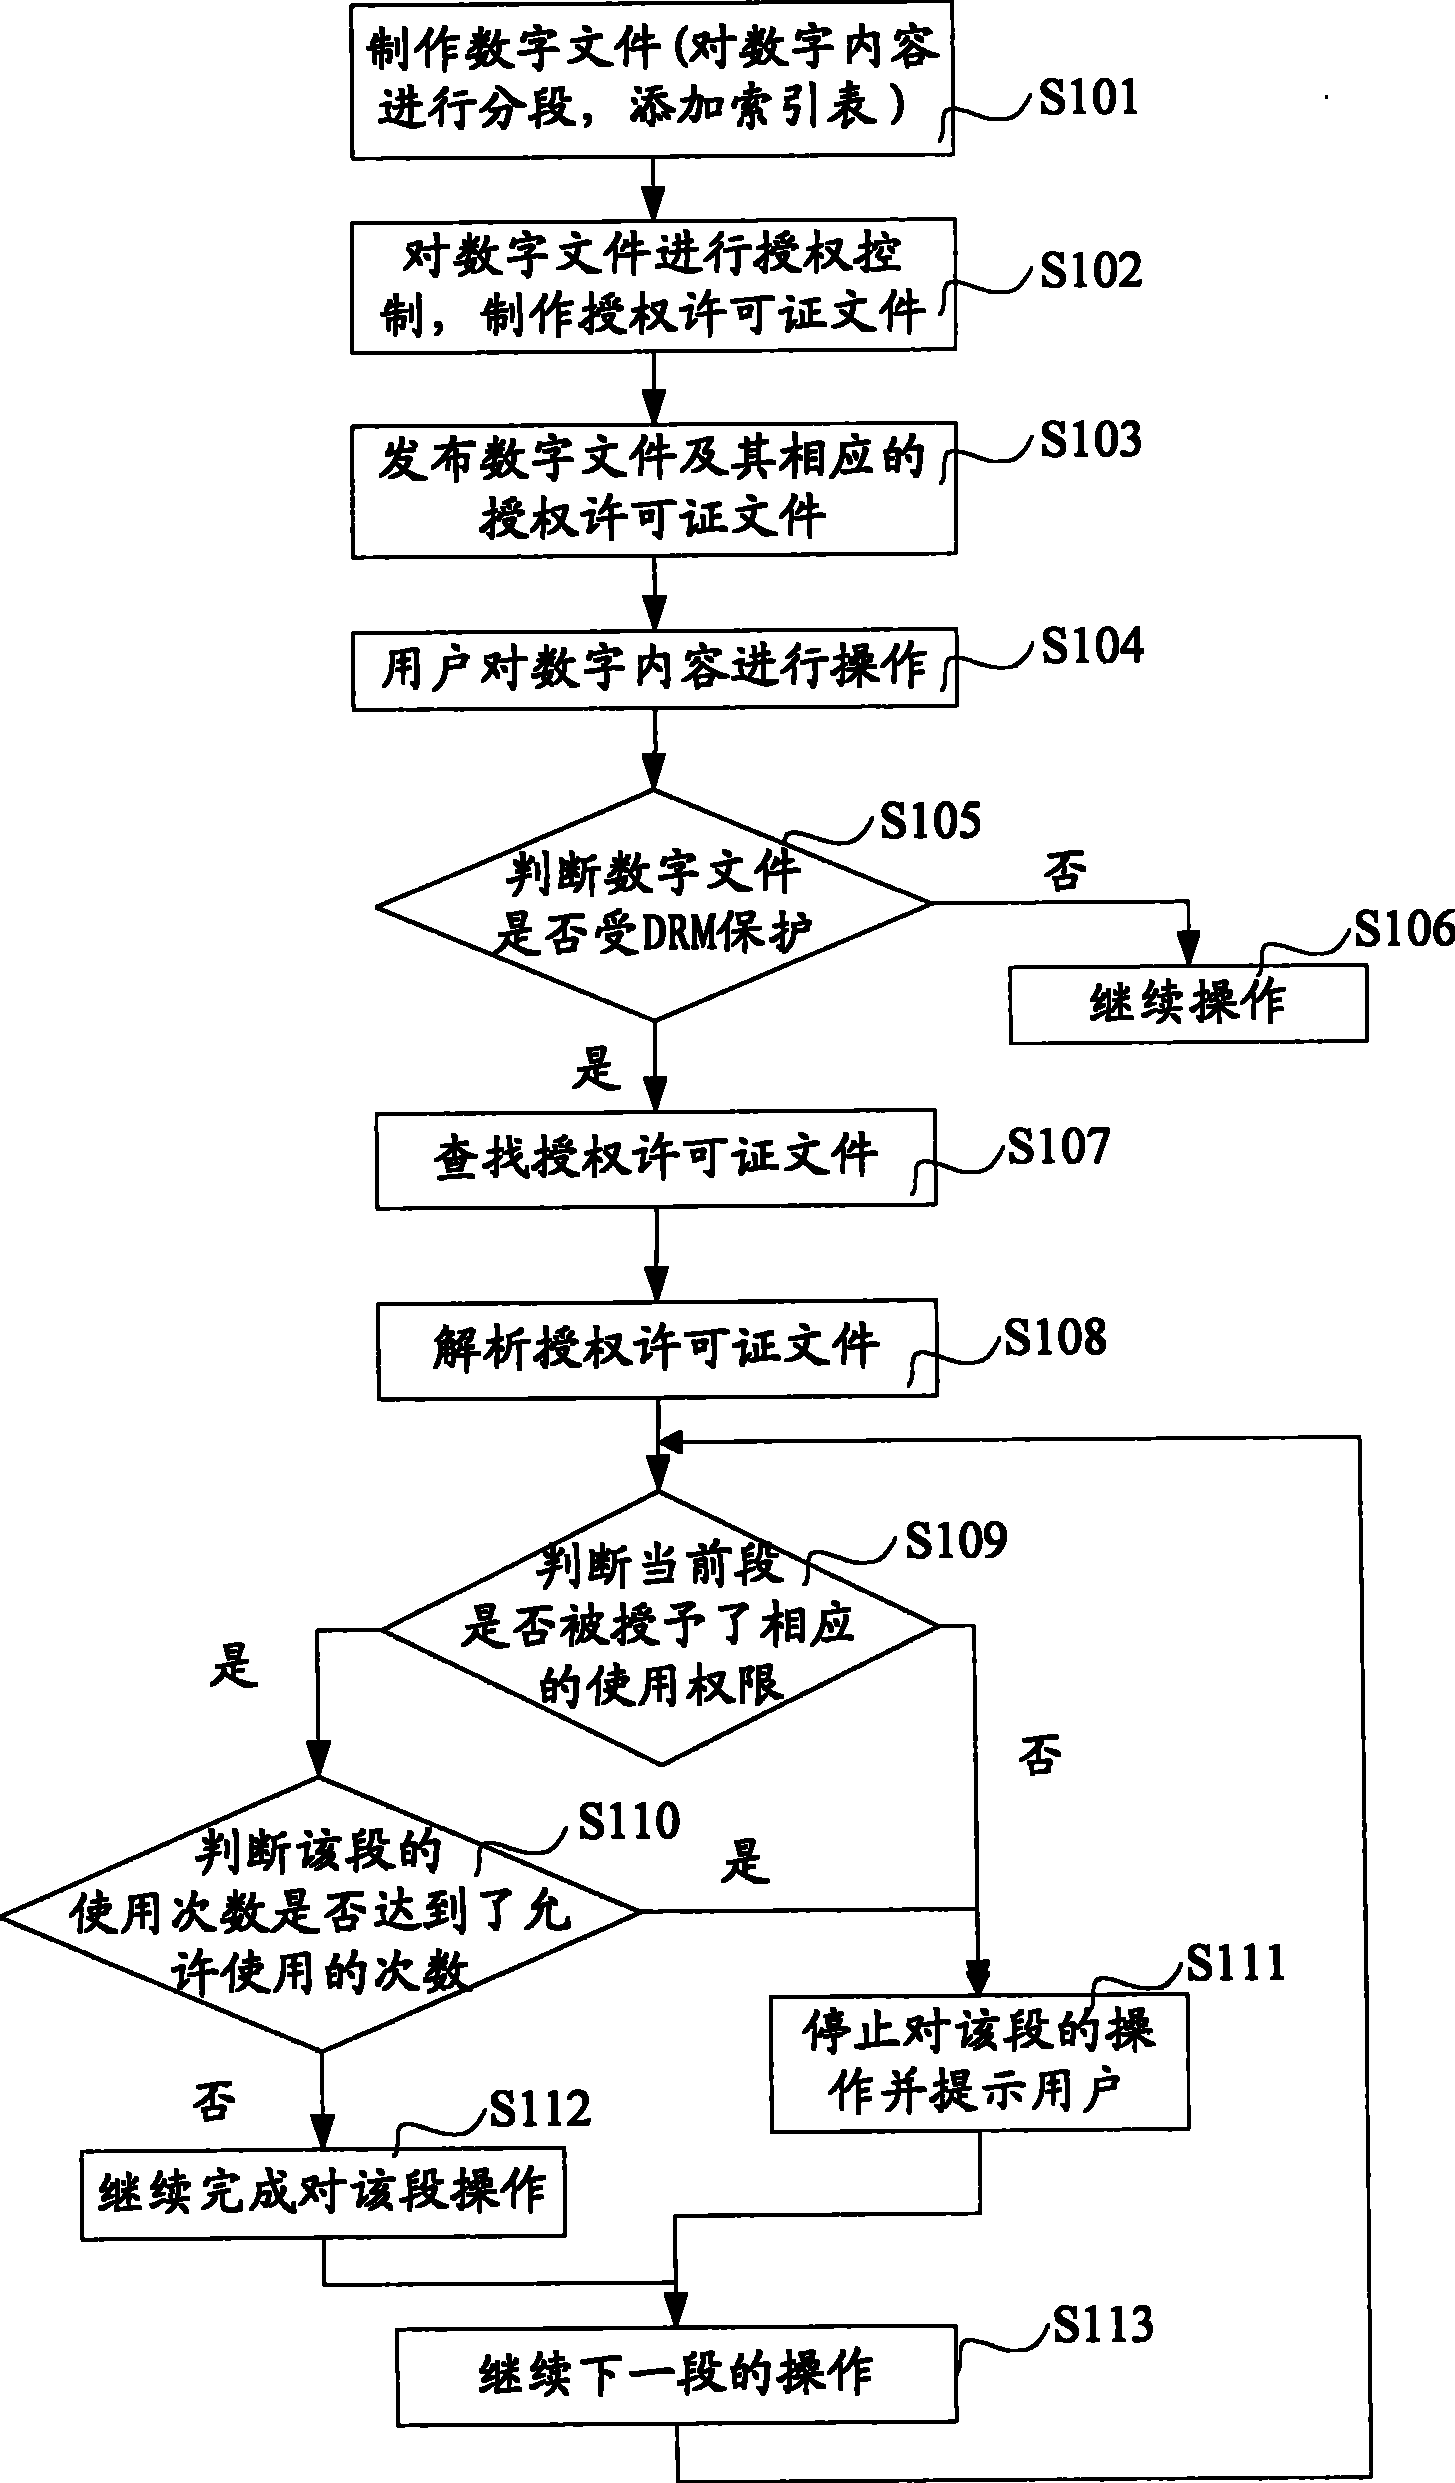 Method and system for implementing authorization management of digital contents